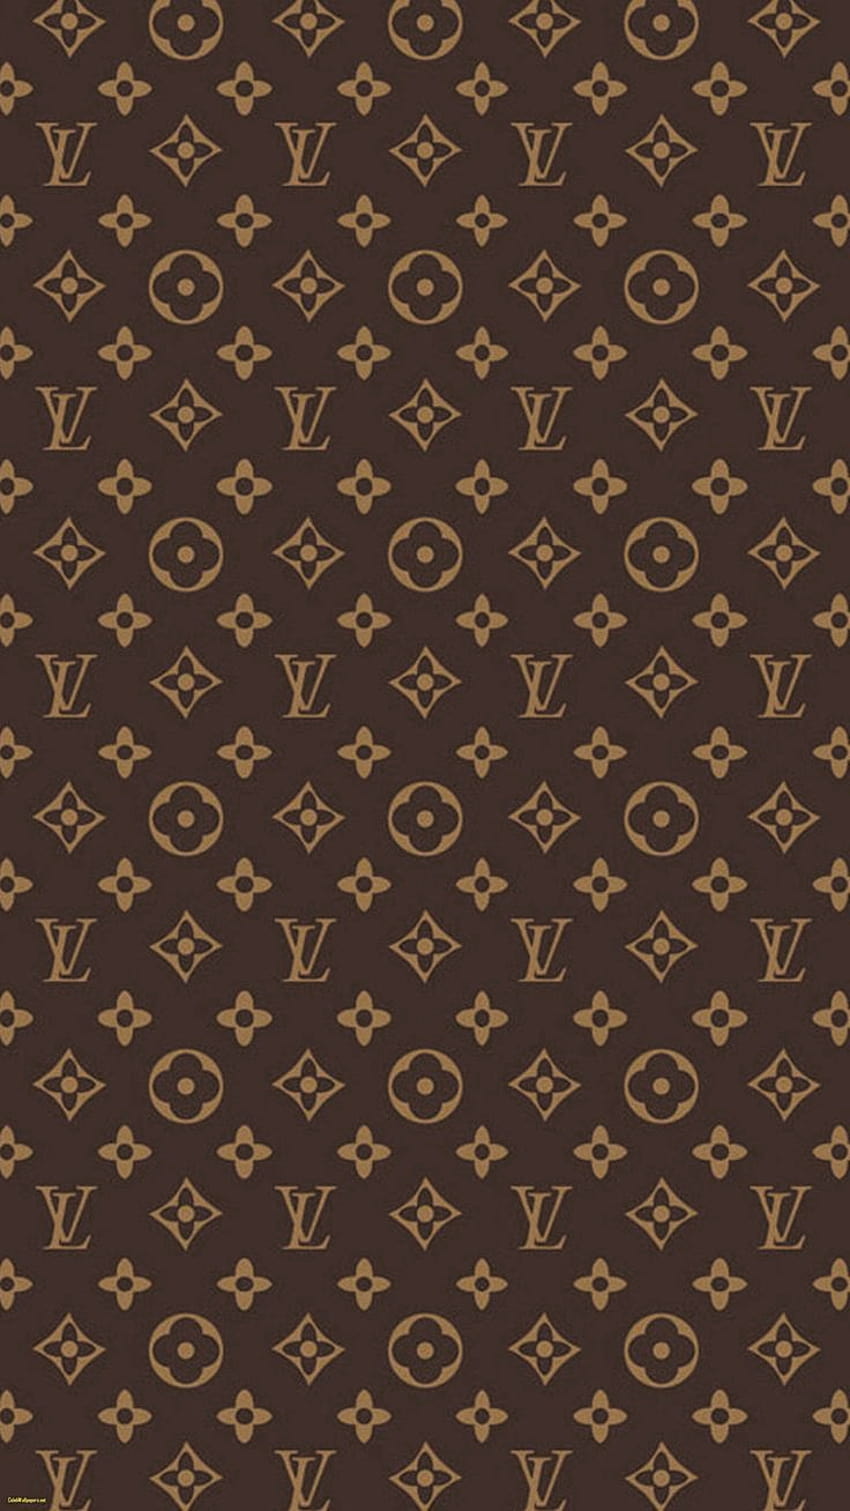 Red & White LV wallpaper  Louis vuitton iphone wallpaper, Hipster wallpaper,  Pretty wallpapers tumblr